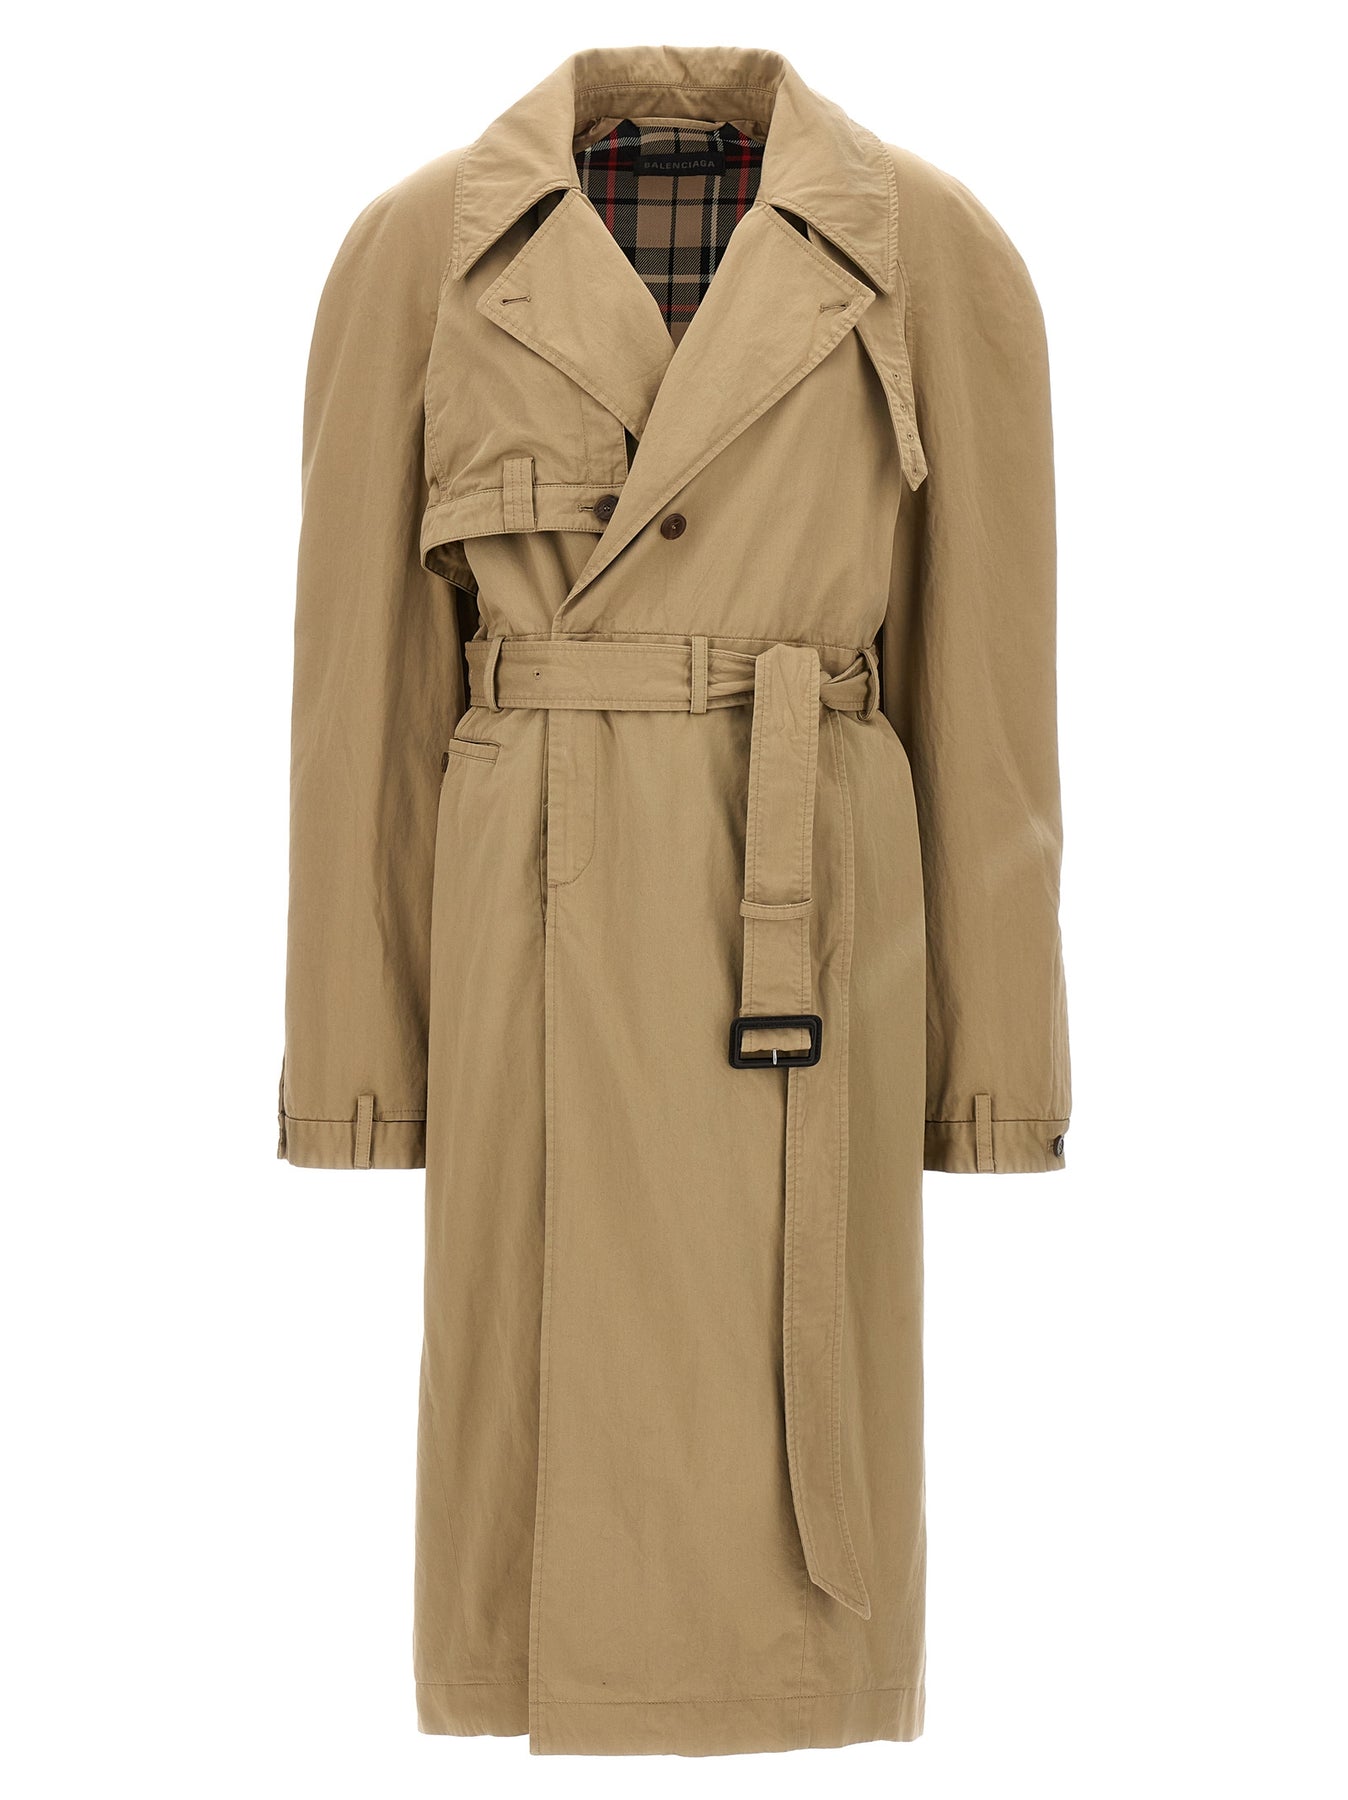 Balenciaga Deconstructed Cotton Twill Trench Coat In Beige